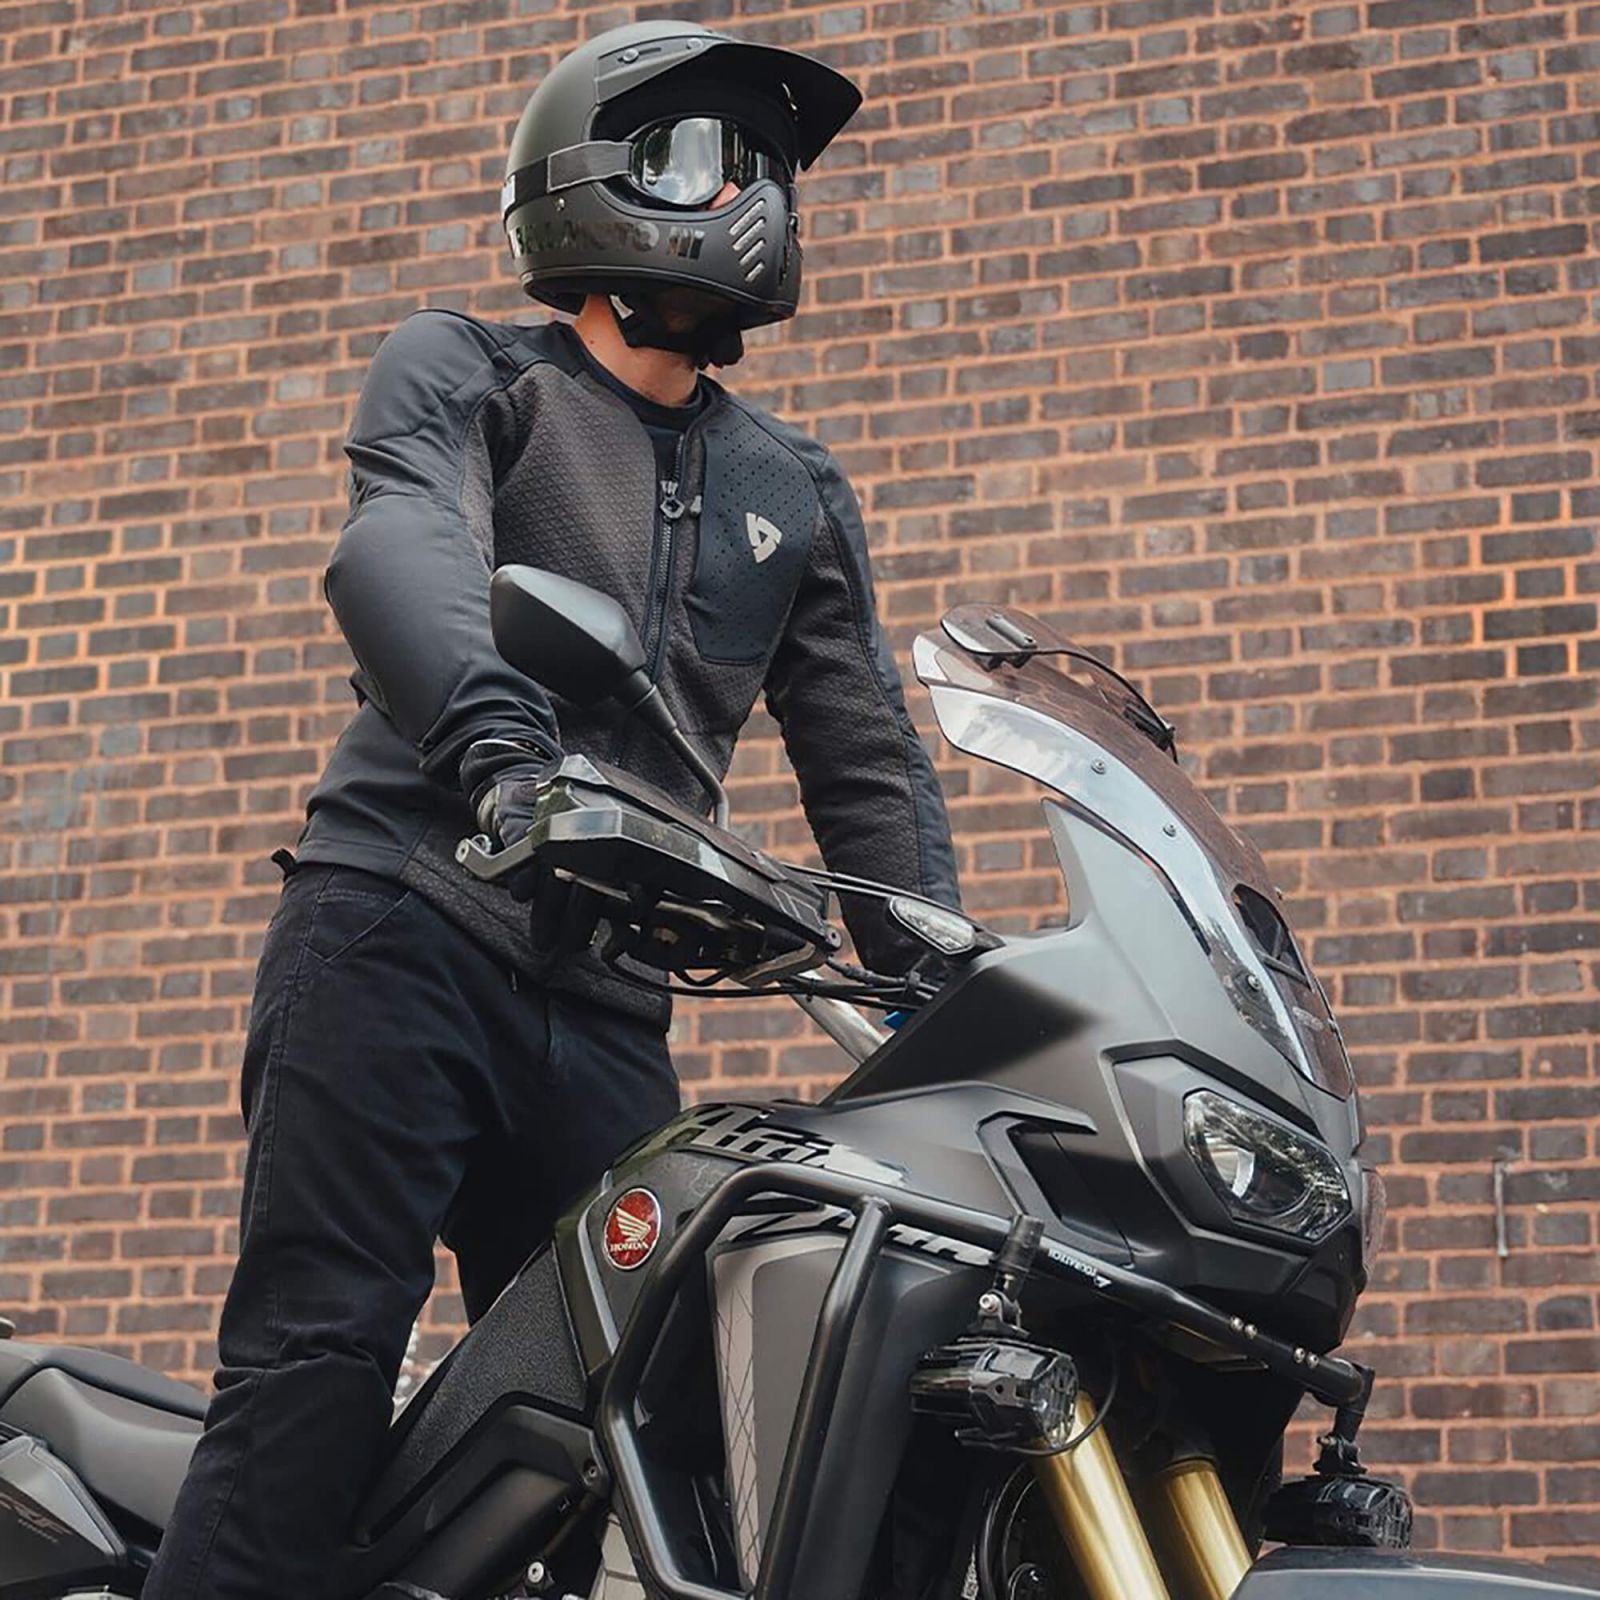 PROTEUS MOTORCYCLE PROTECTOR JACKET